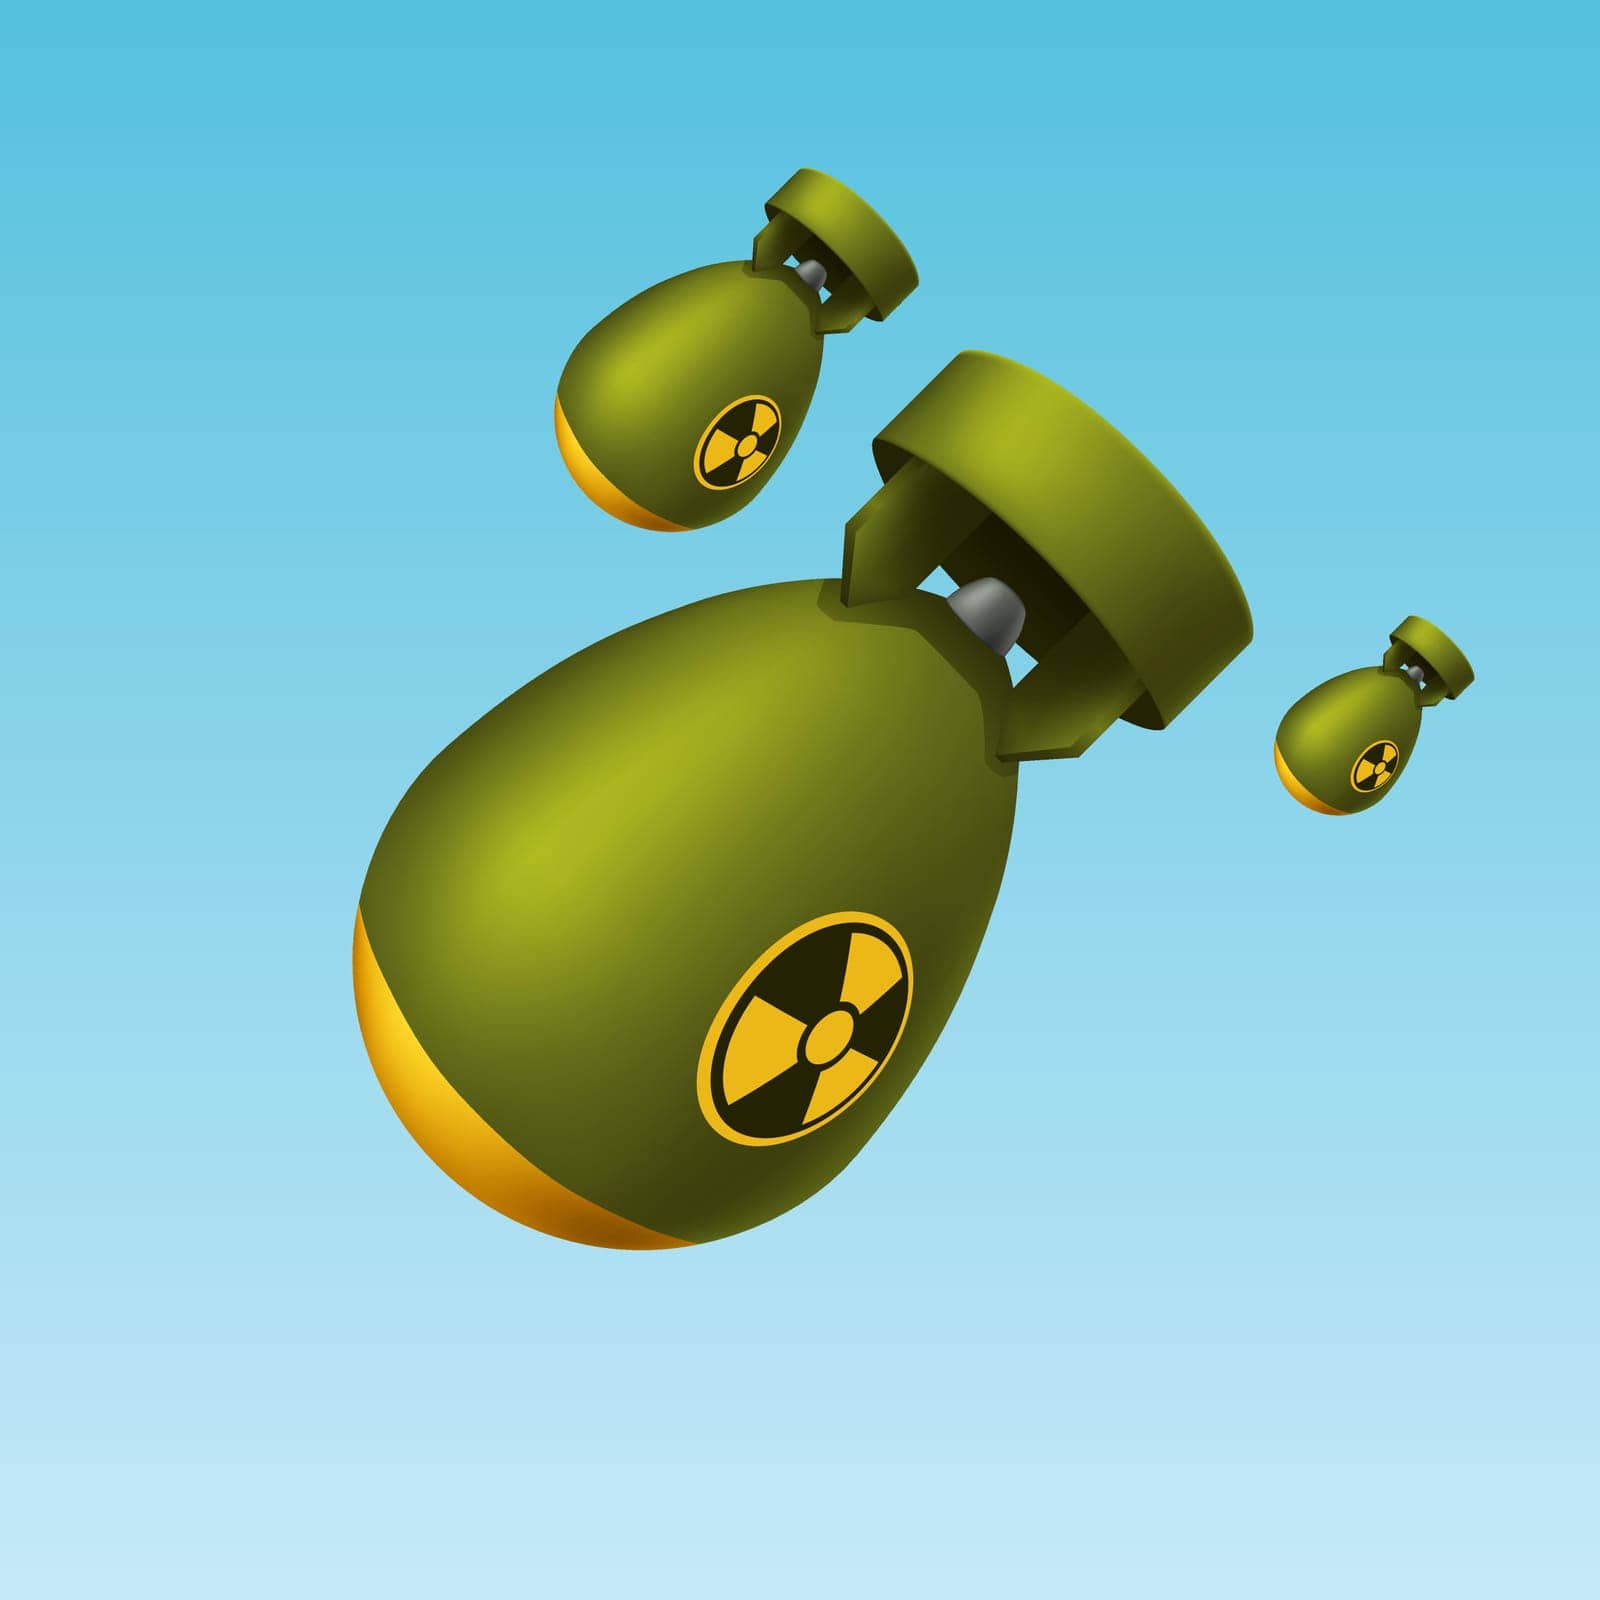 nuclear bombs attack on blue by IfH